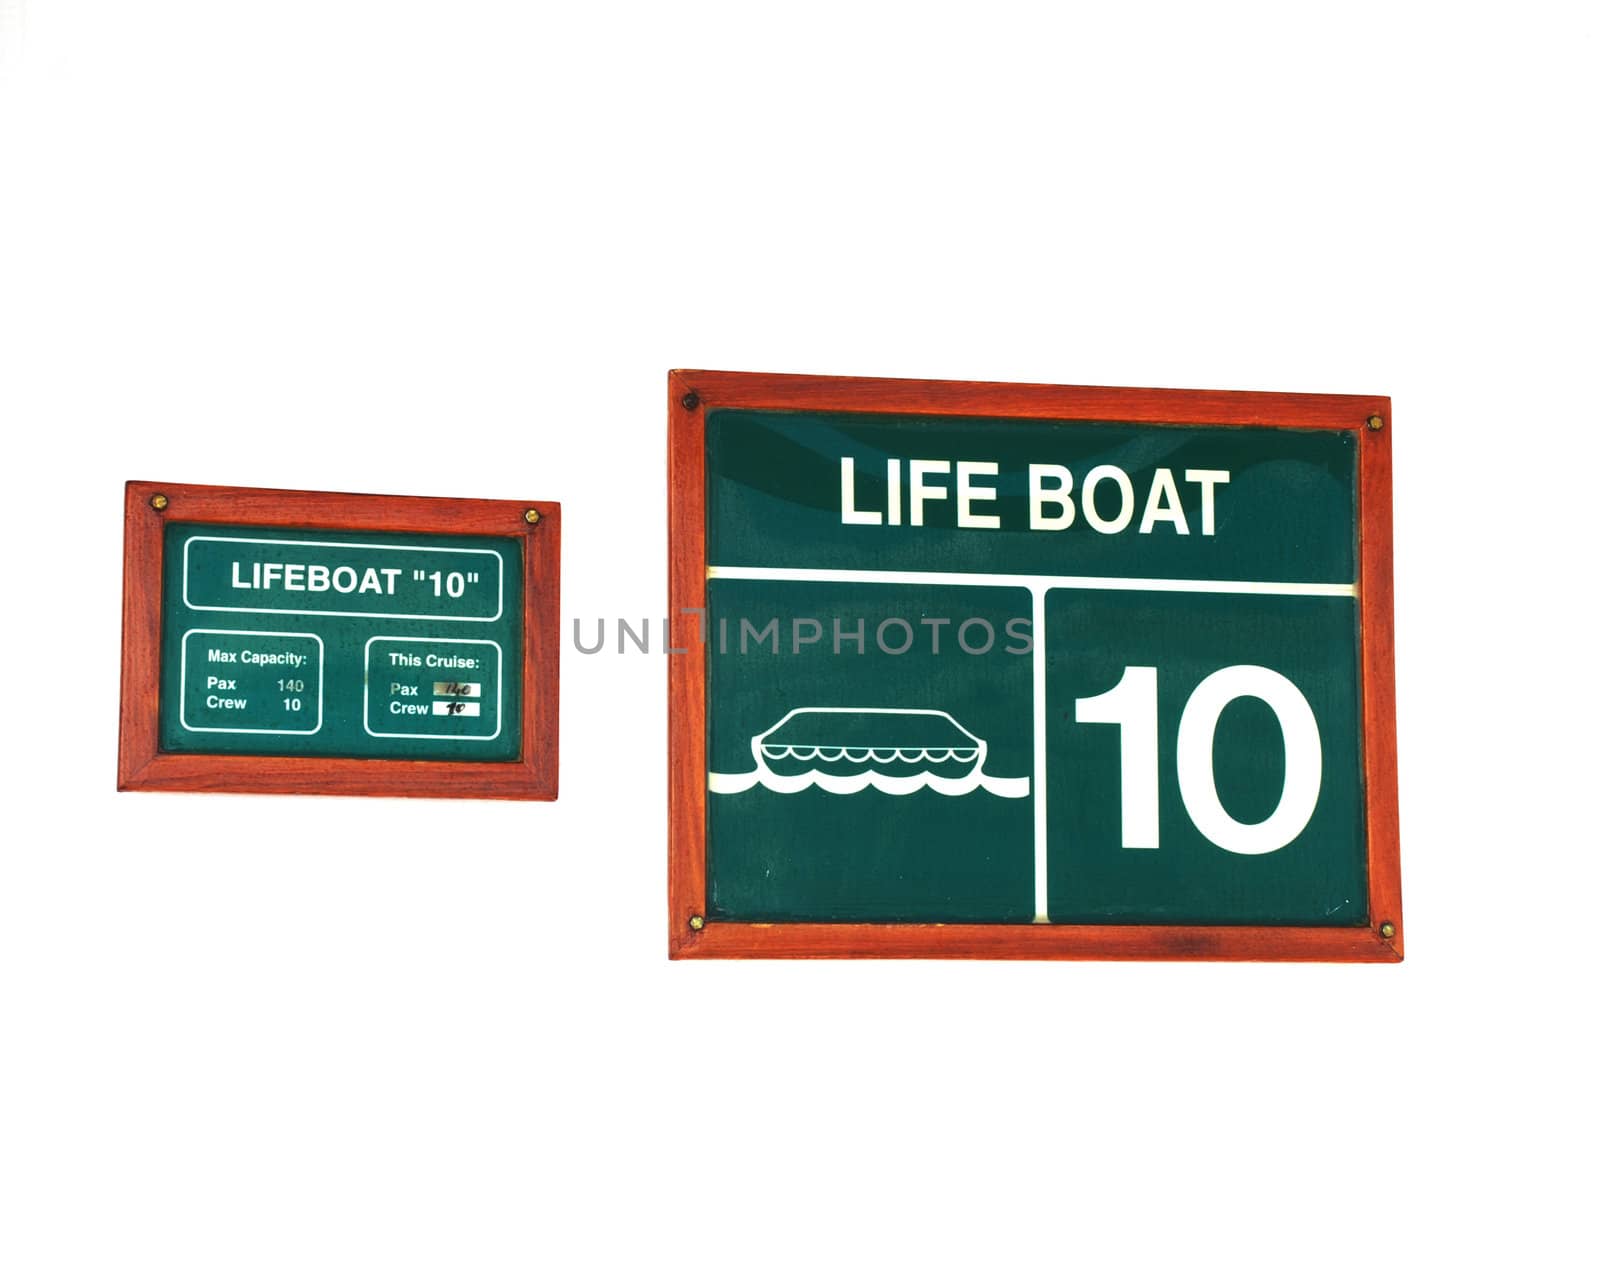 stock pictures of plaques with warnings and prohibitions
